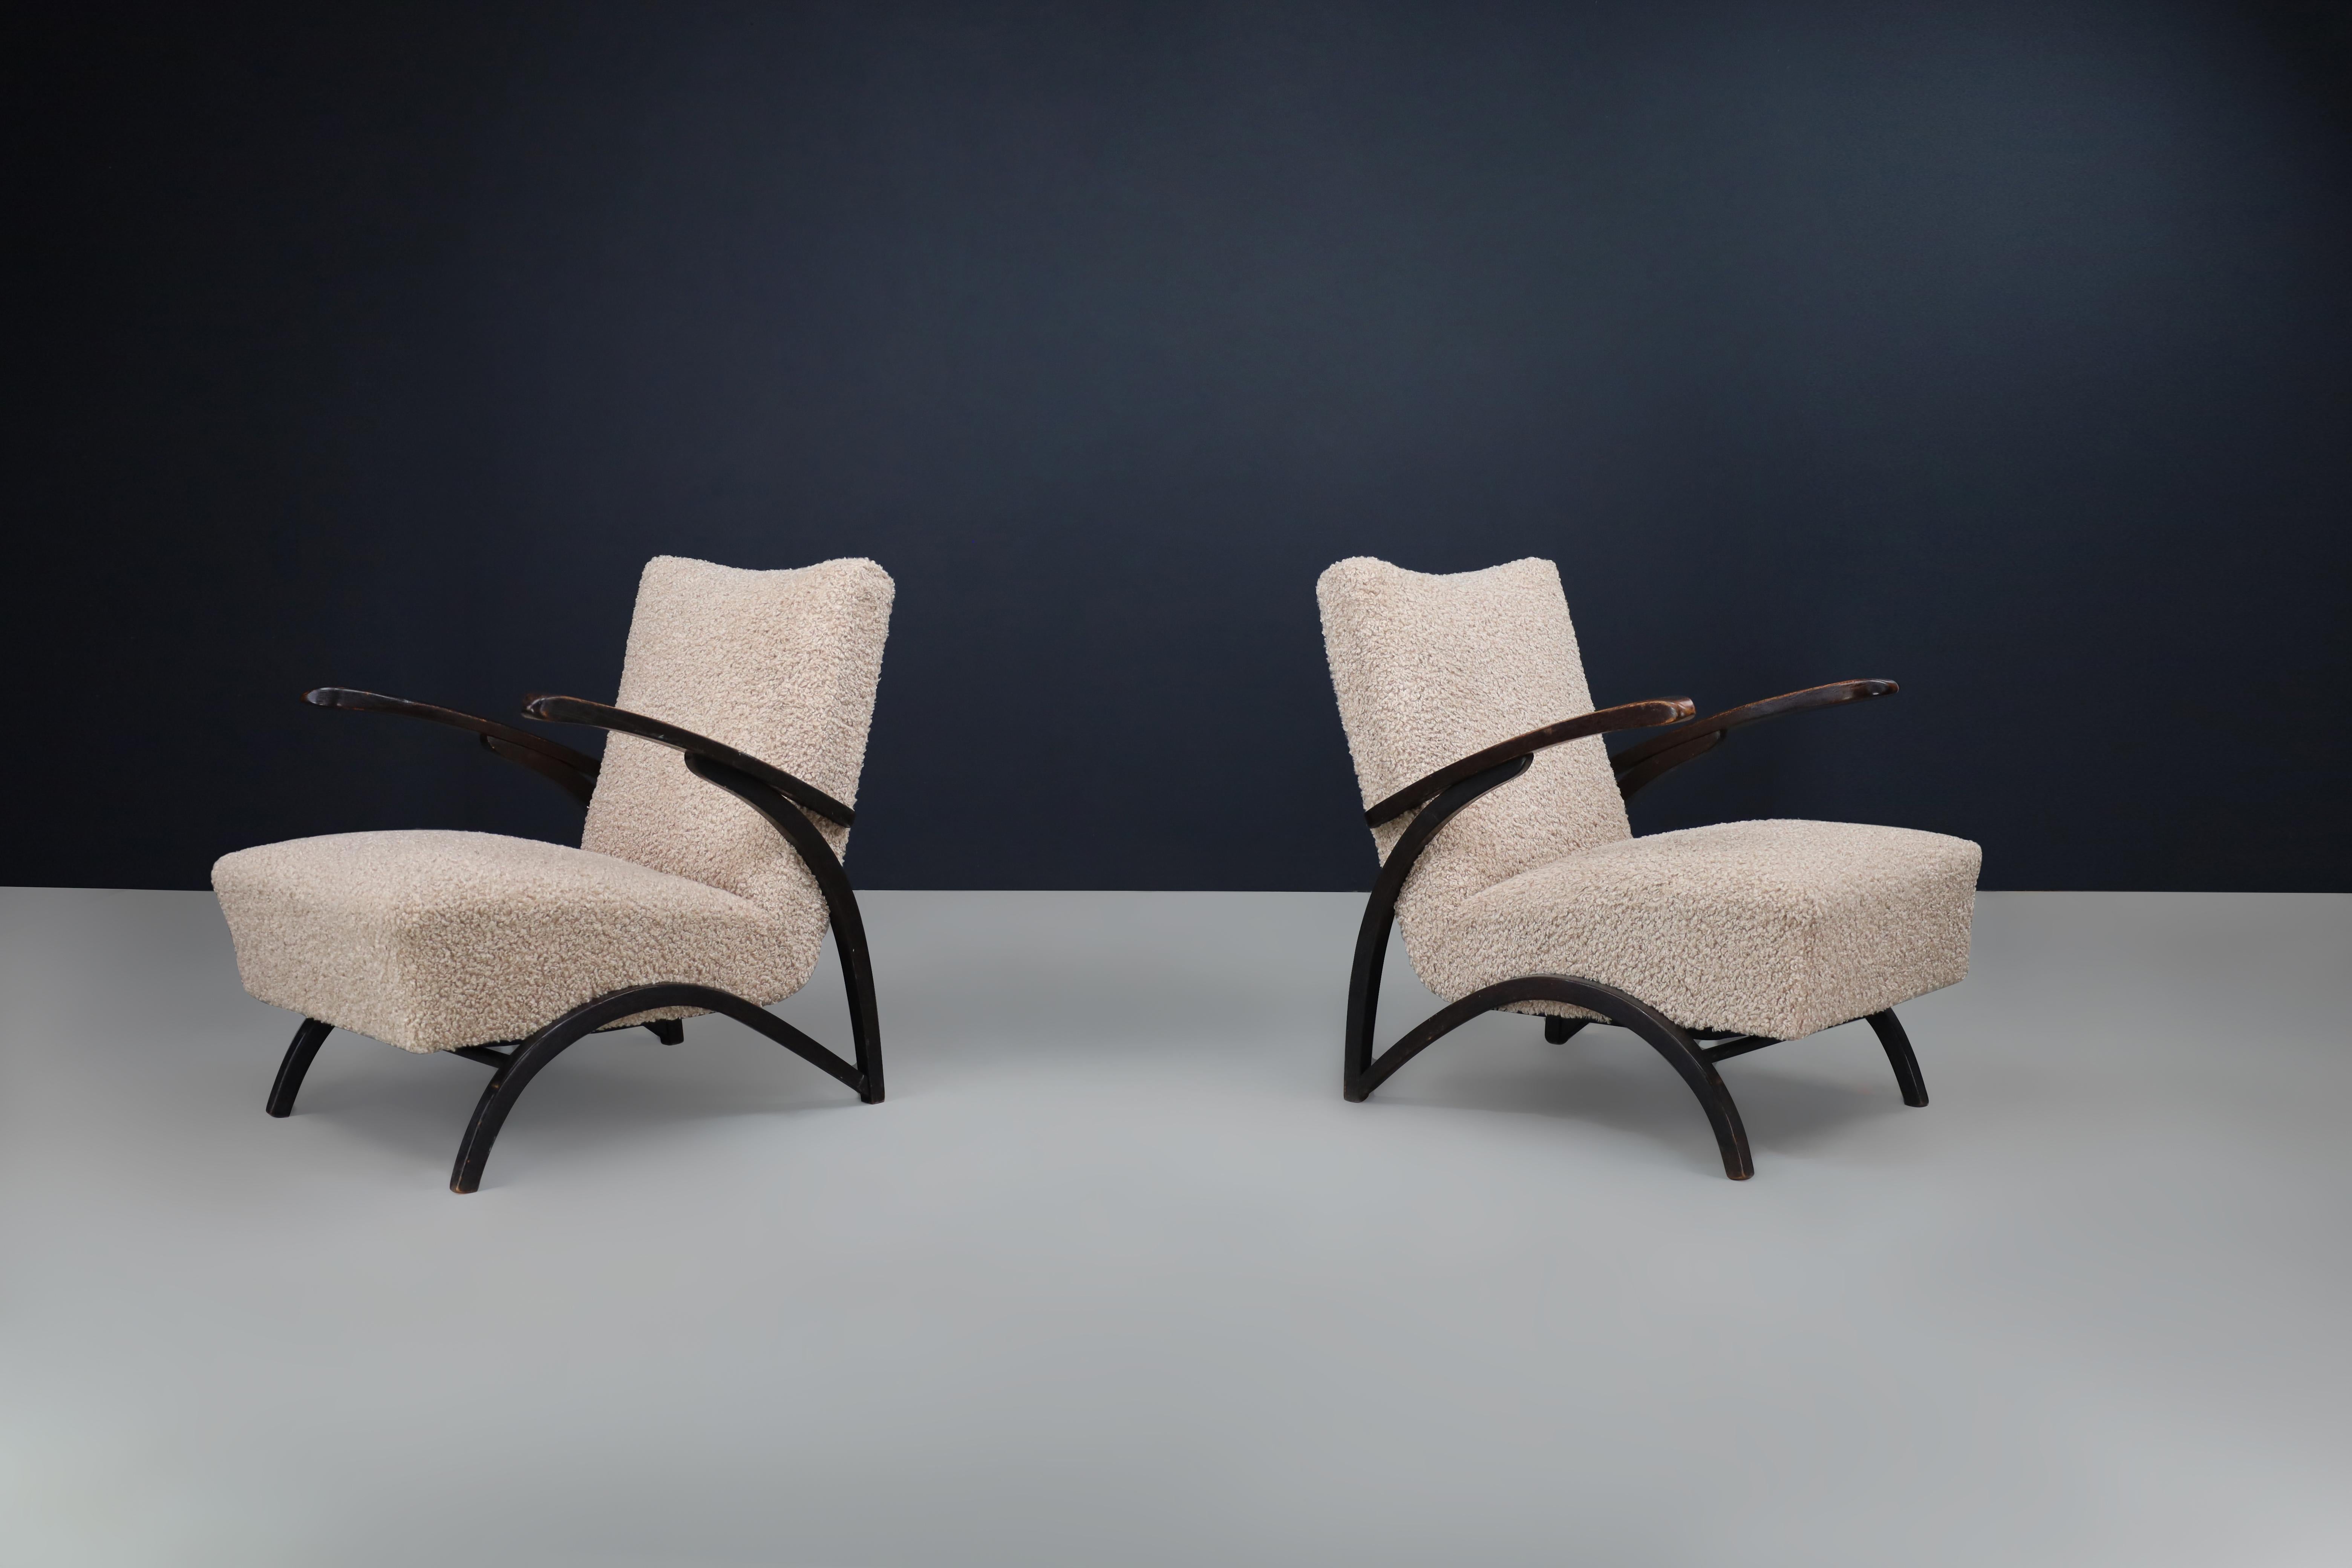 Jindrich Halabala Lounge Chairs in Teddy  Upholstery Czech Republic 1930. 

These lounge chairs were designed by Jindrich Halabala and produced by Thonet in Czechia around 1930. They are an excellent representation of midcentury design in Central